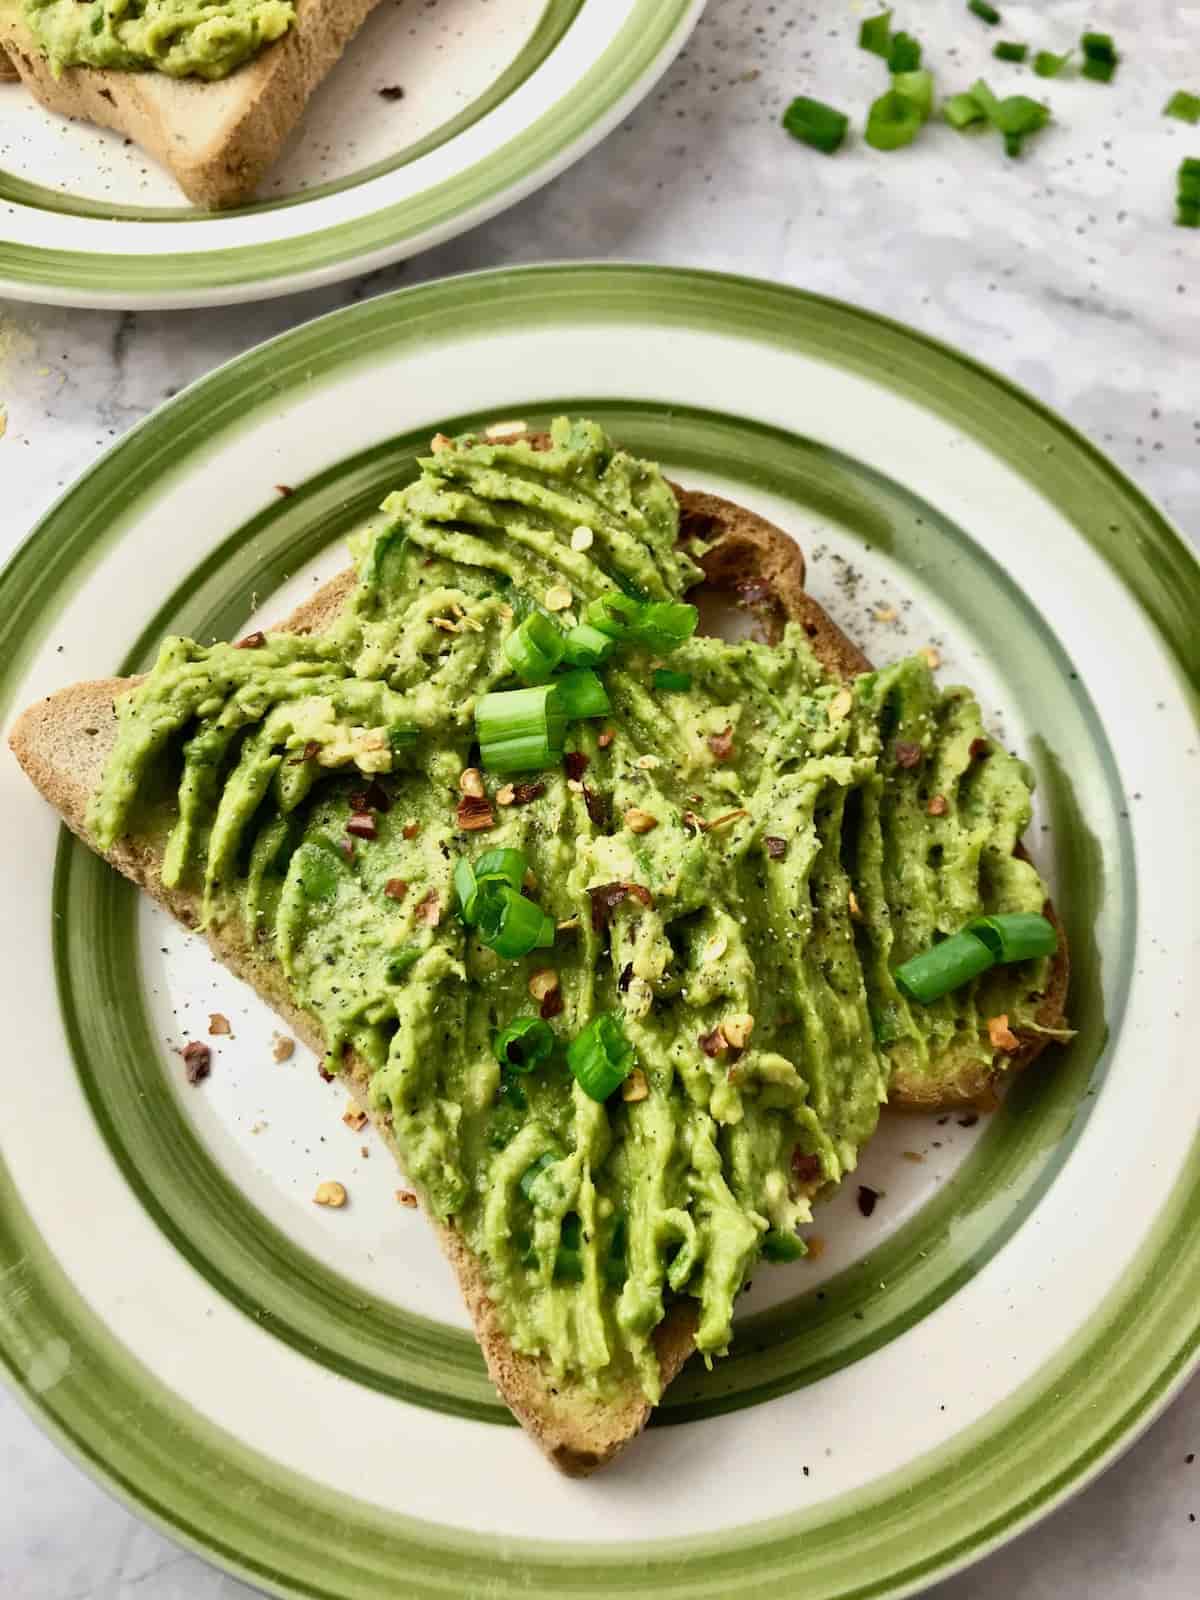 Avocado toast on a plate with green onion and red pepper flakes on top.